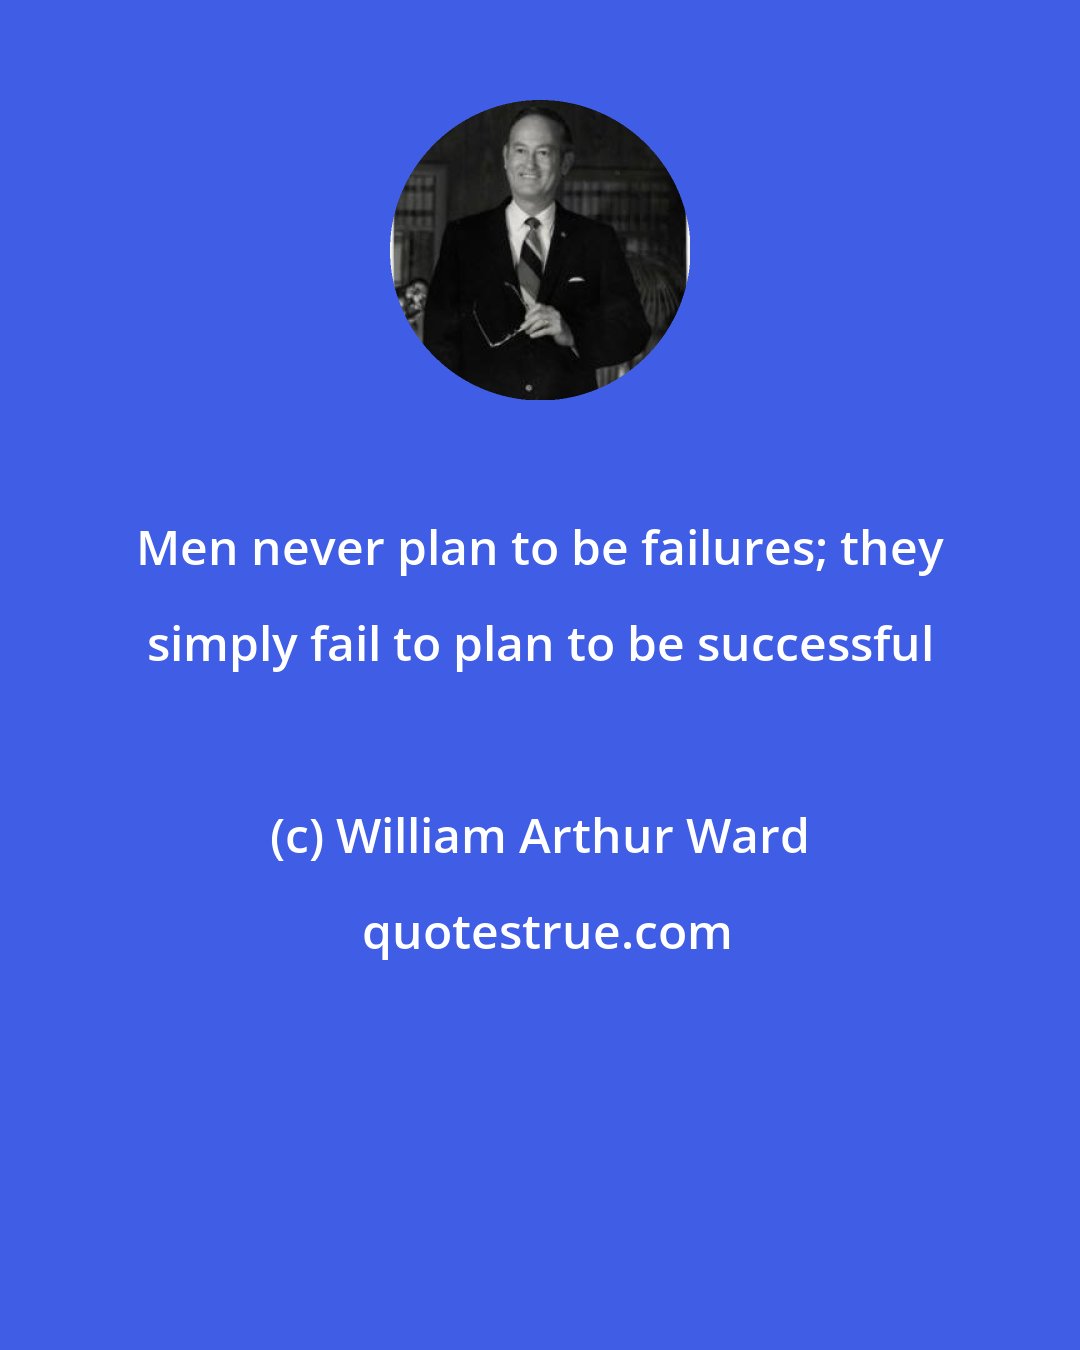 William Arthur Ward: Men never plan to be failures; they simply fail to plan to be successful